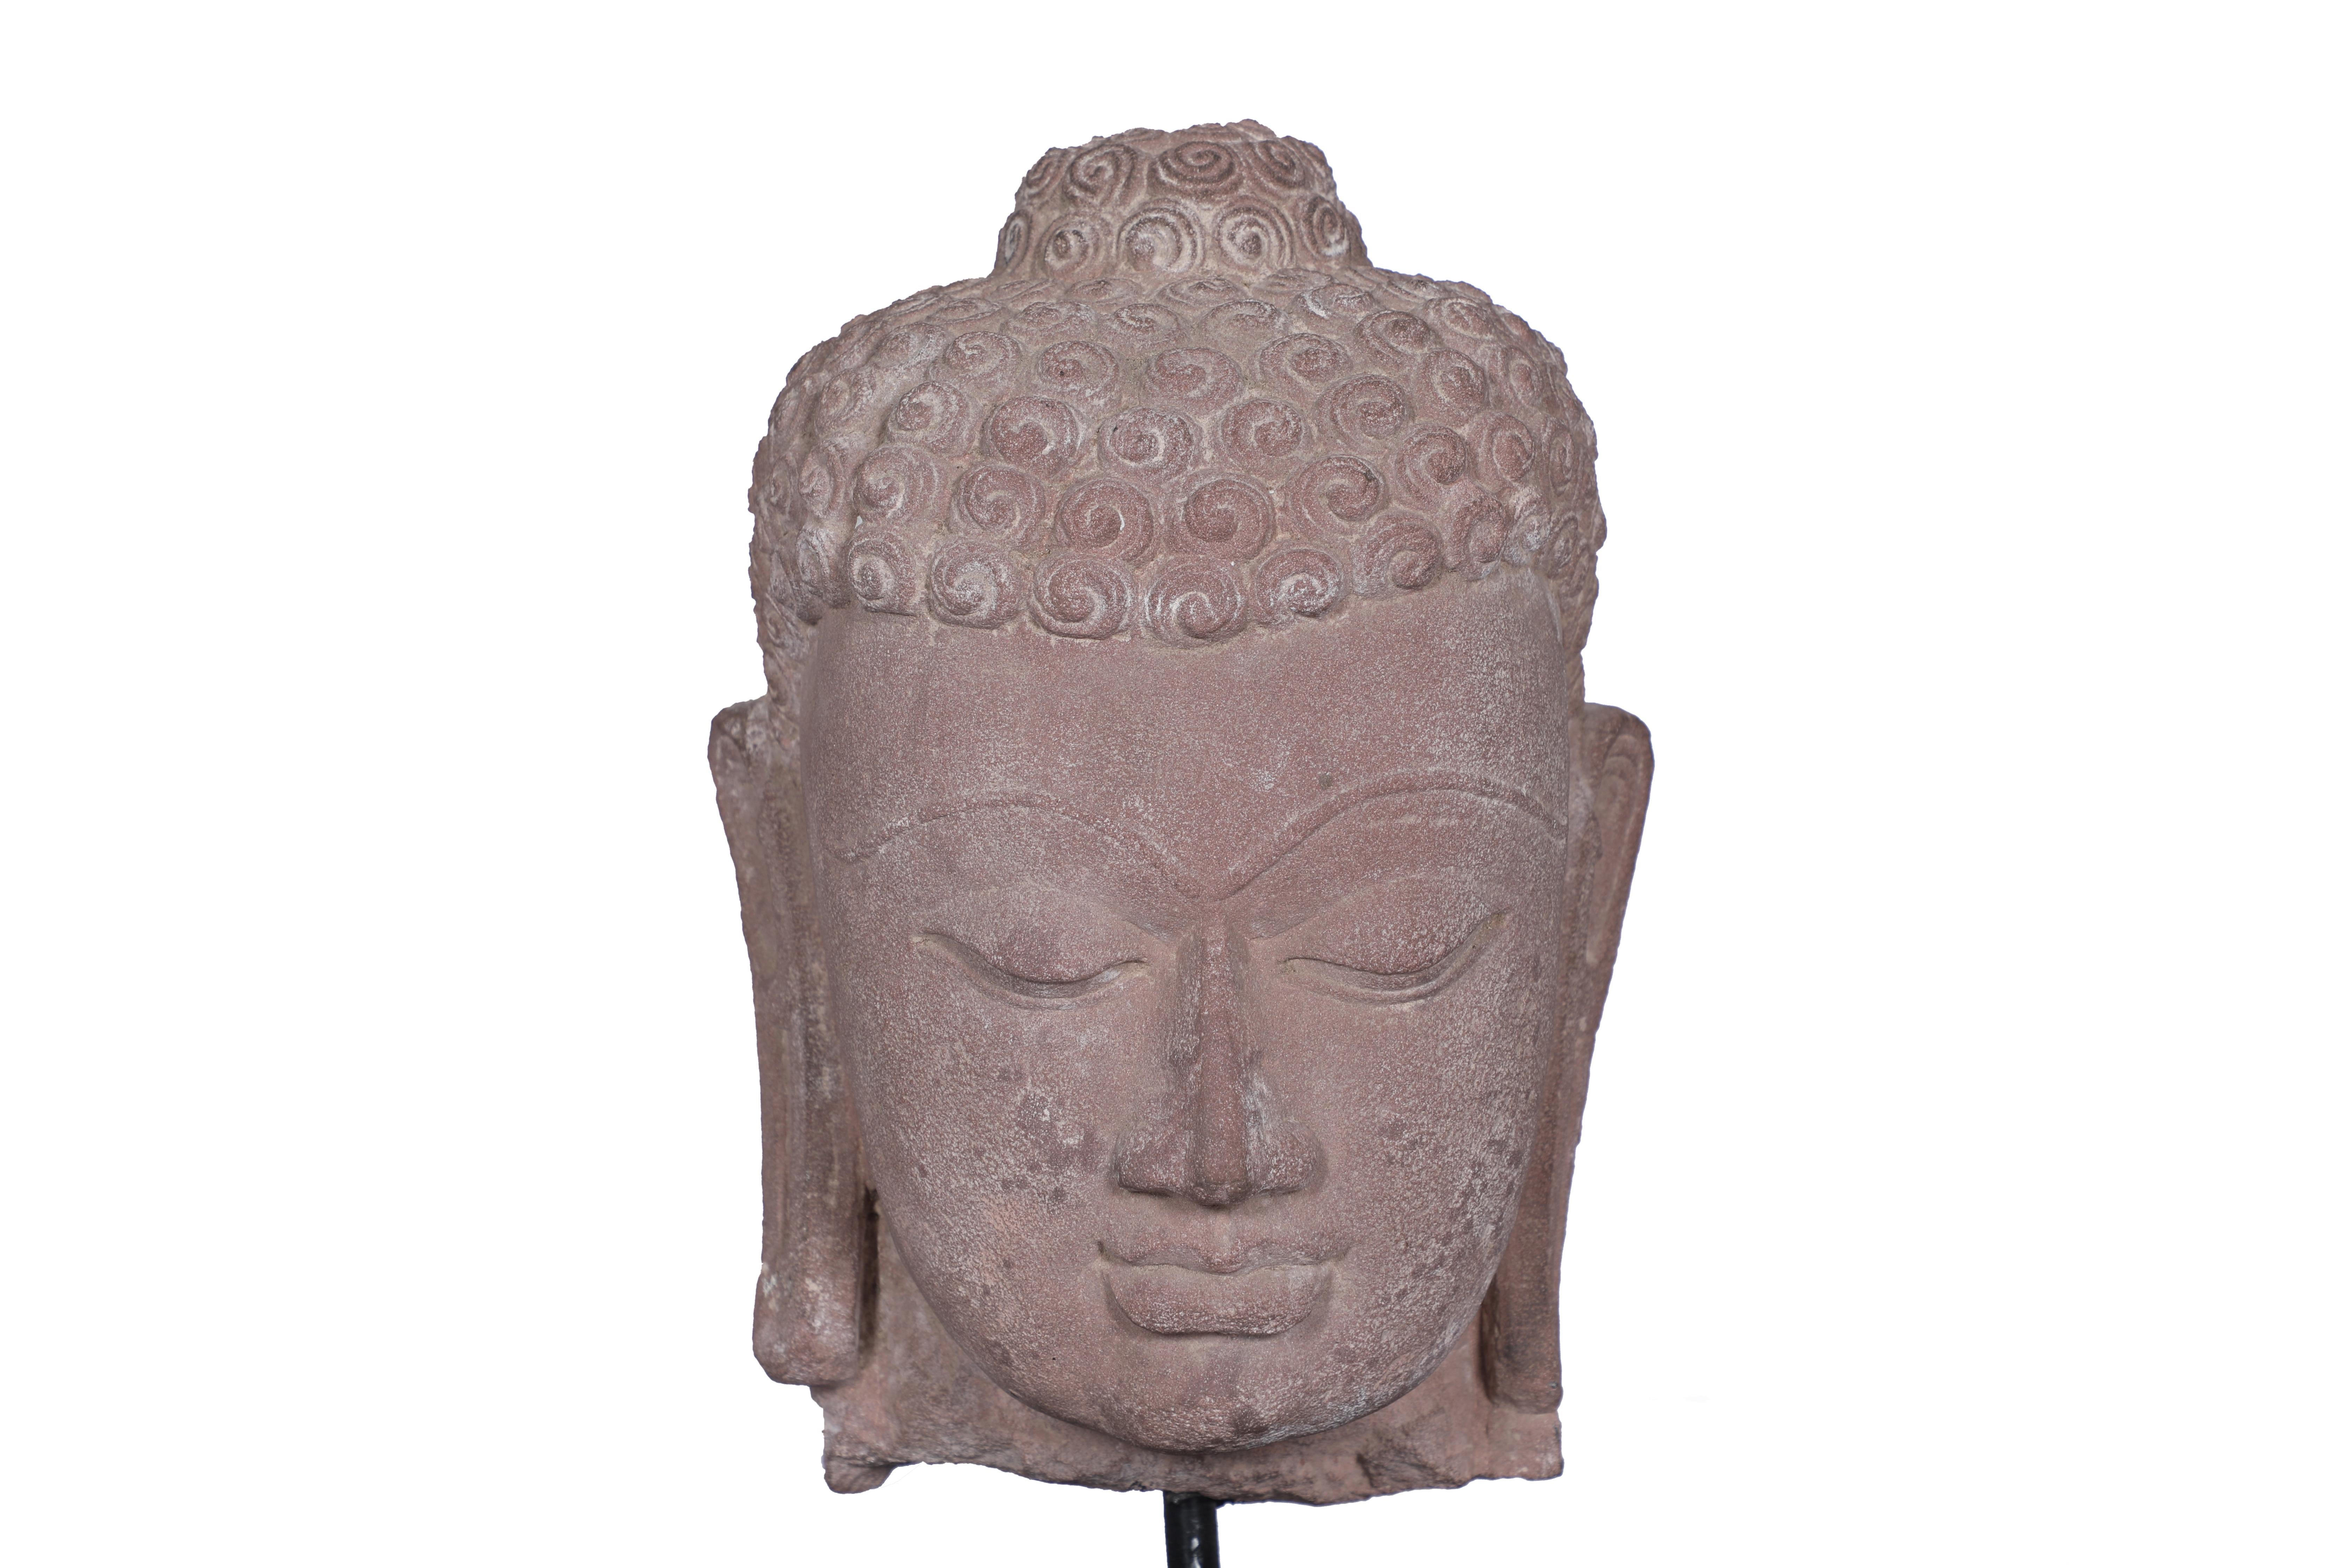 A lovely sandstone Buddha head on wooden base, early 1900's, Utttar Pradesh, Northern India. The hand-carved features include the typical snail-shell curled hair, elongated ears, half-closed eyes and serene smile. The Ushnisha crown depicts the